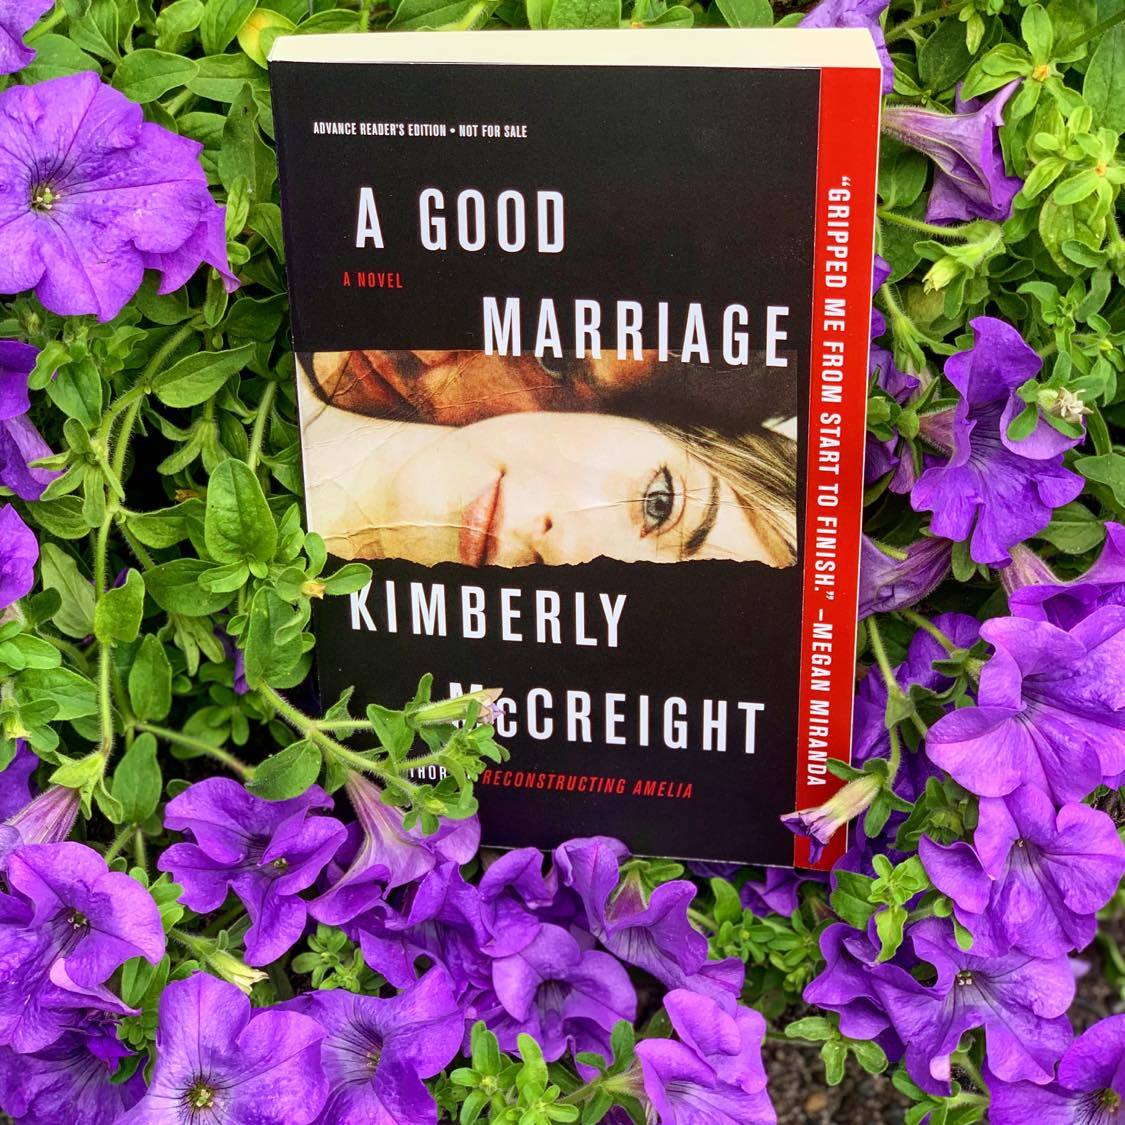 Review: A Good Marriage by Kimberly McCreight